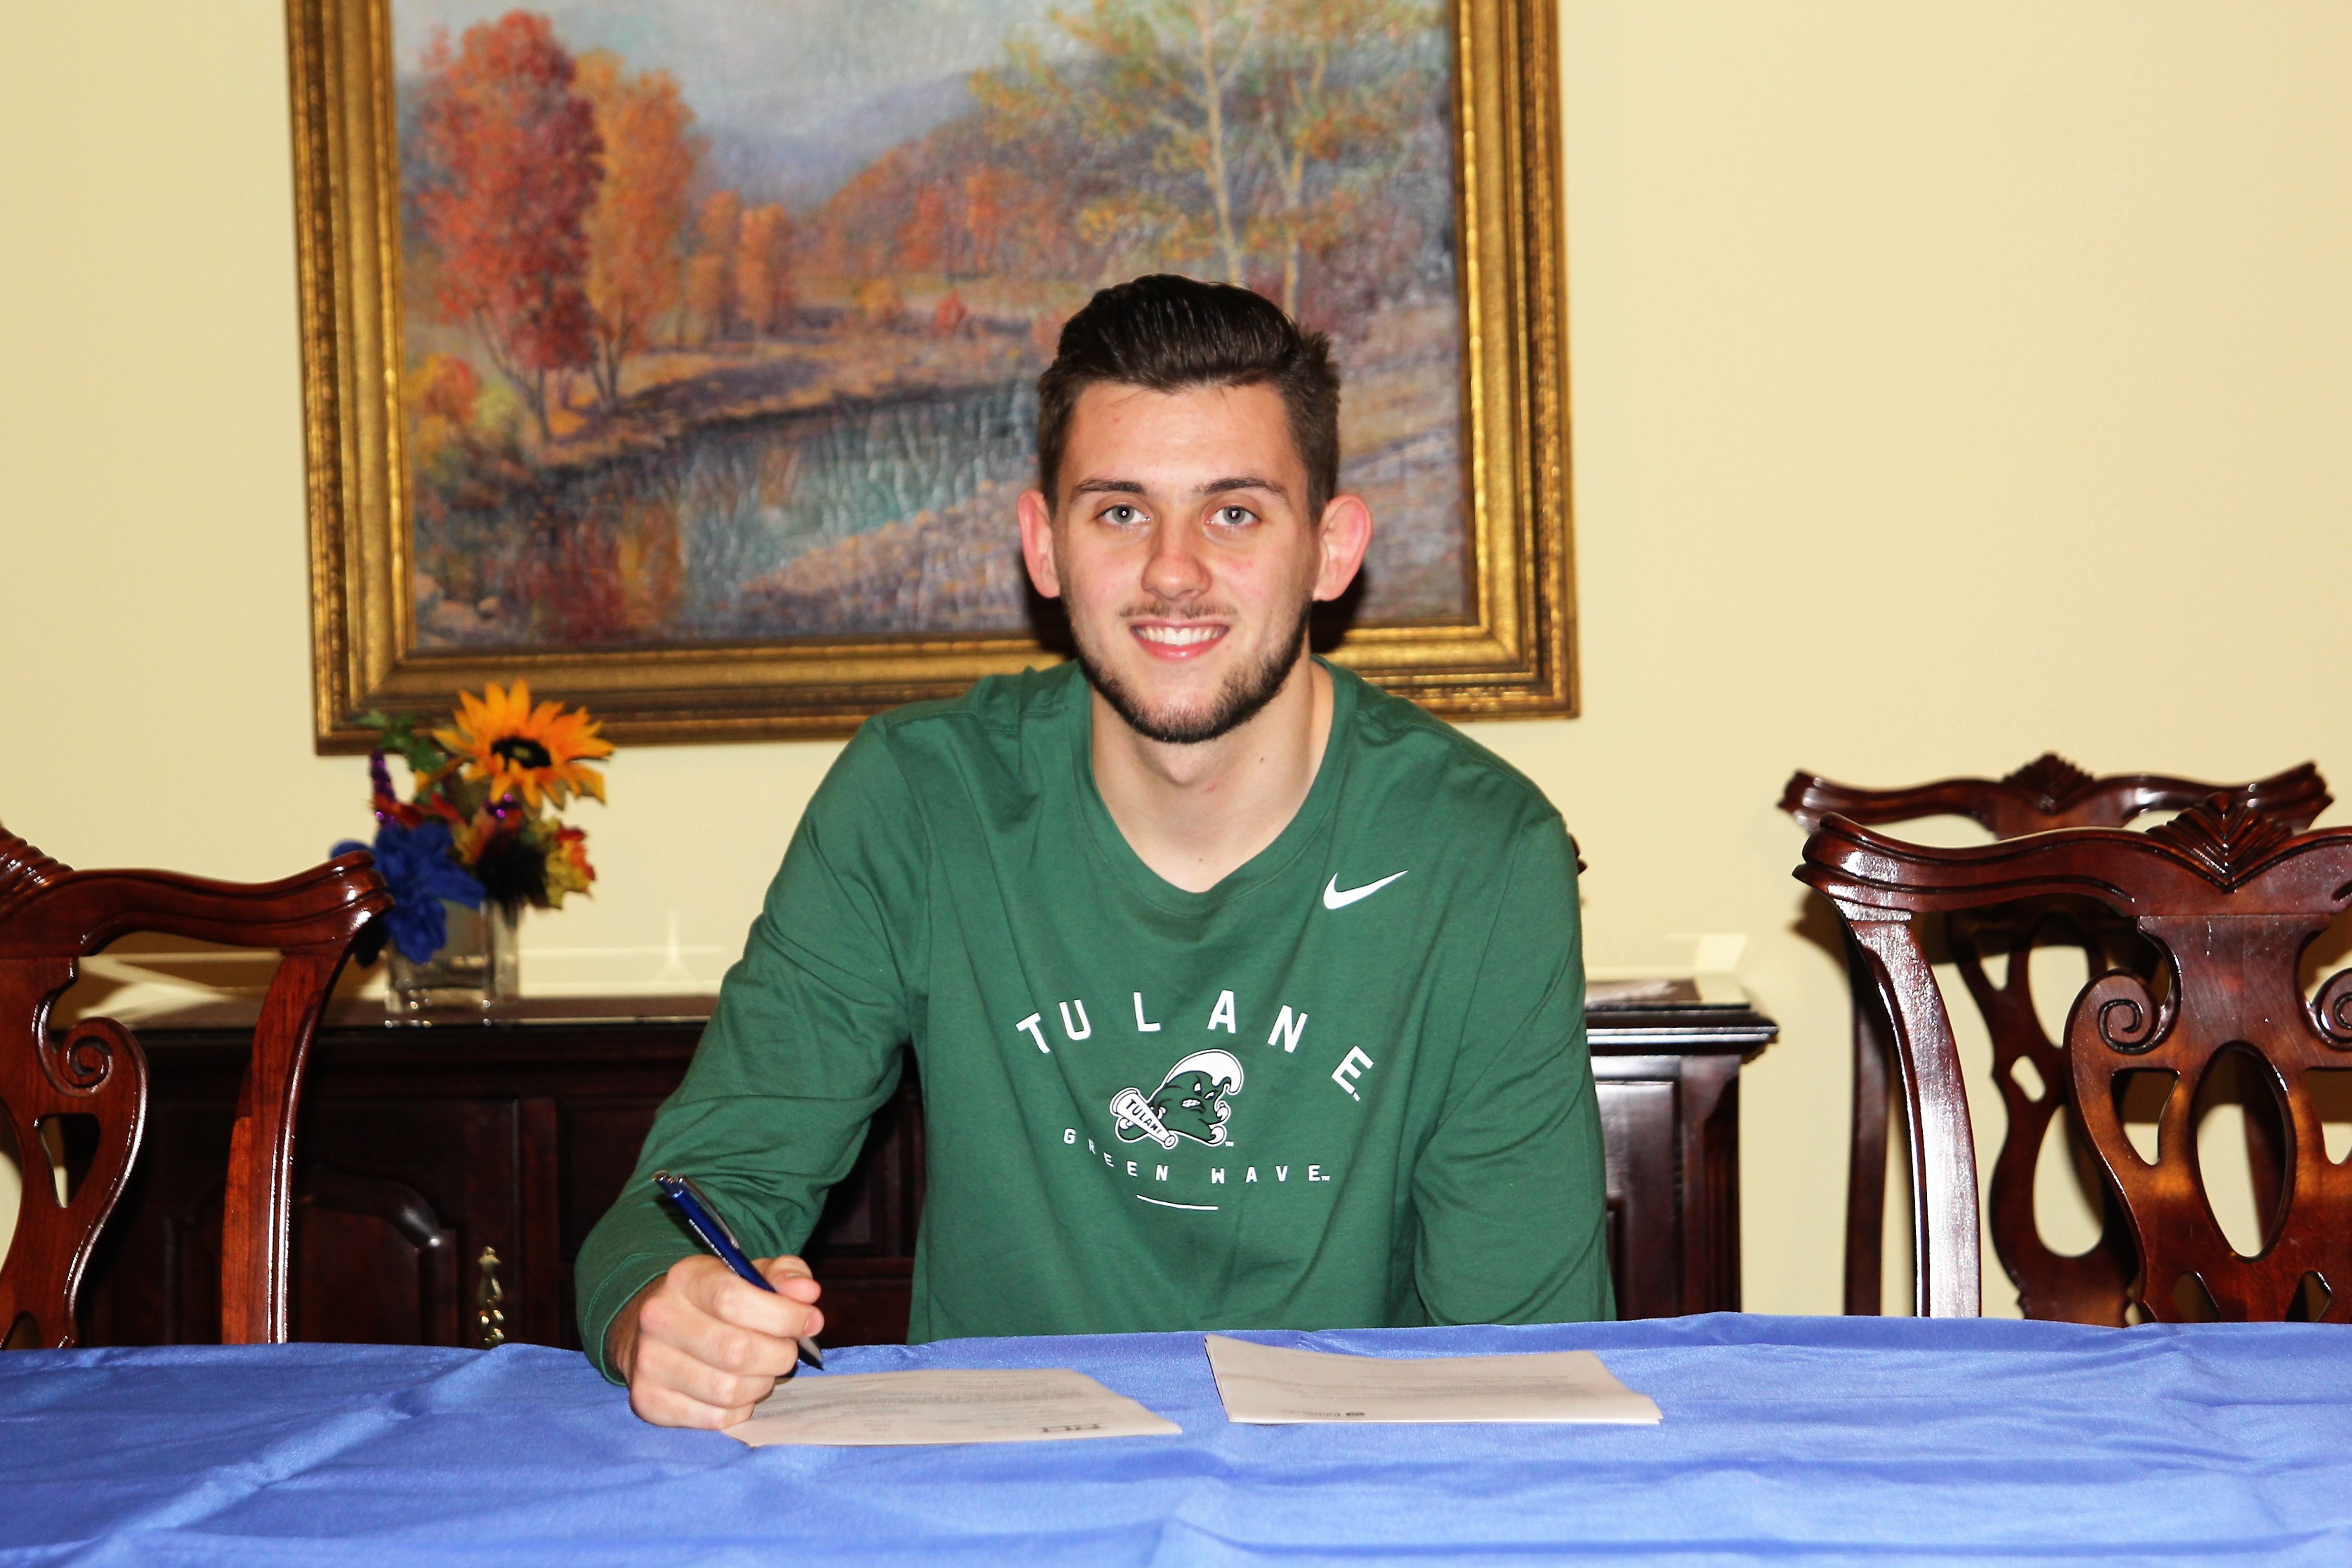 HENRI LANGTON, a 6-foot, 11-inch transfer forward with the Missouri State University-West Plains Grizzly Basketball team, signed an official letter of intent to continue his collegiate basketball career at Tulane University beginning this fall. (Missouri State-West Plains Photo)